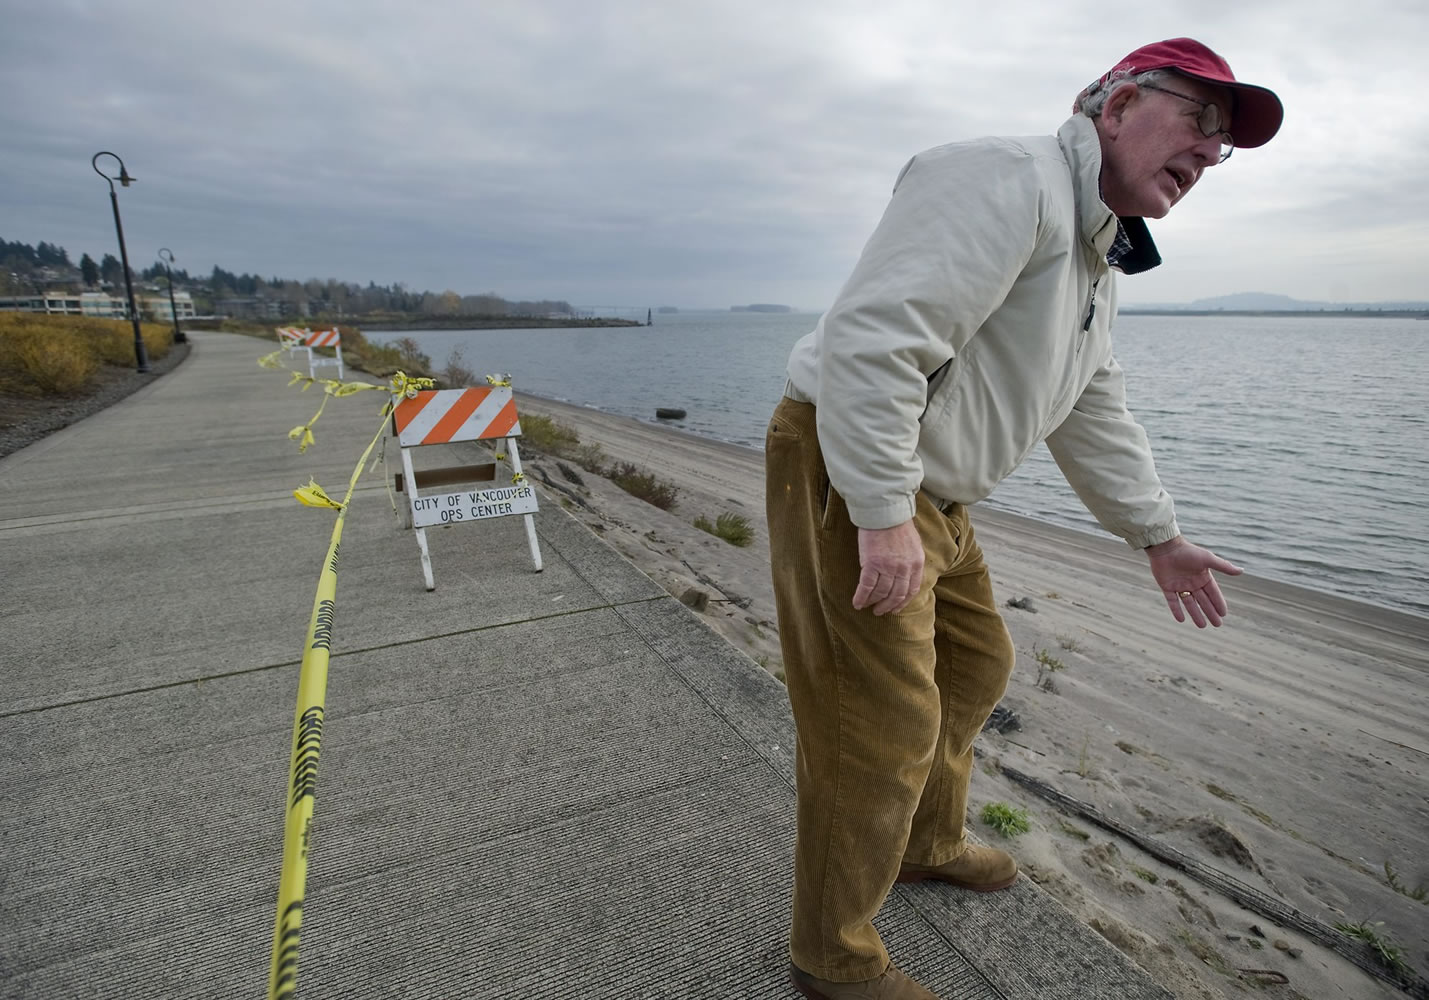 Paul Schwabe, a resident at the Tidewater Cove Condominiums, points out where the banks of the Columbia River are eroding, causing the indefinite closure of the Renaissance Trail.